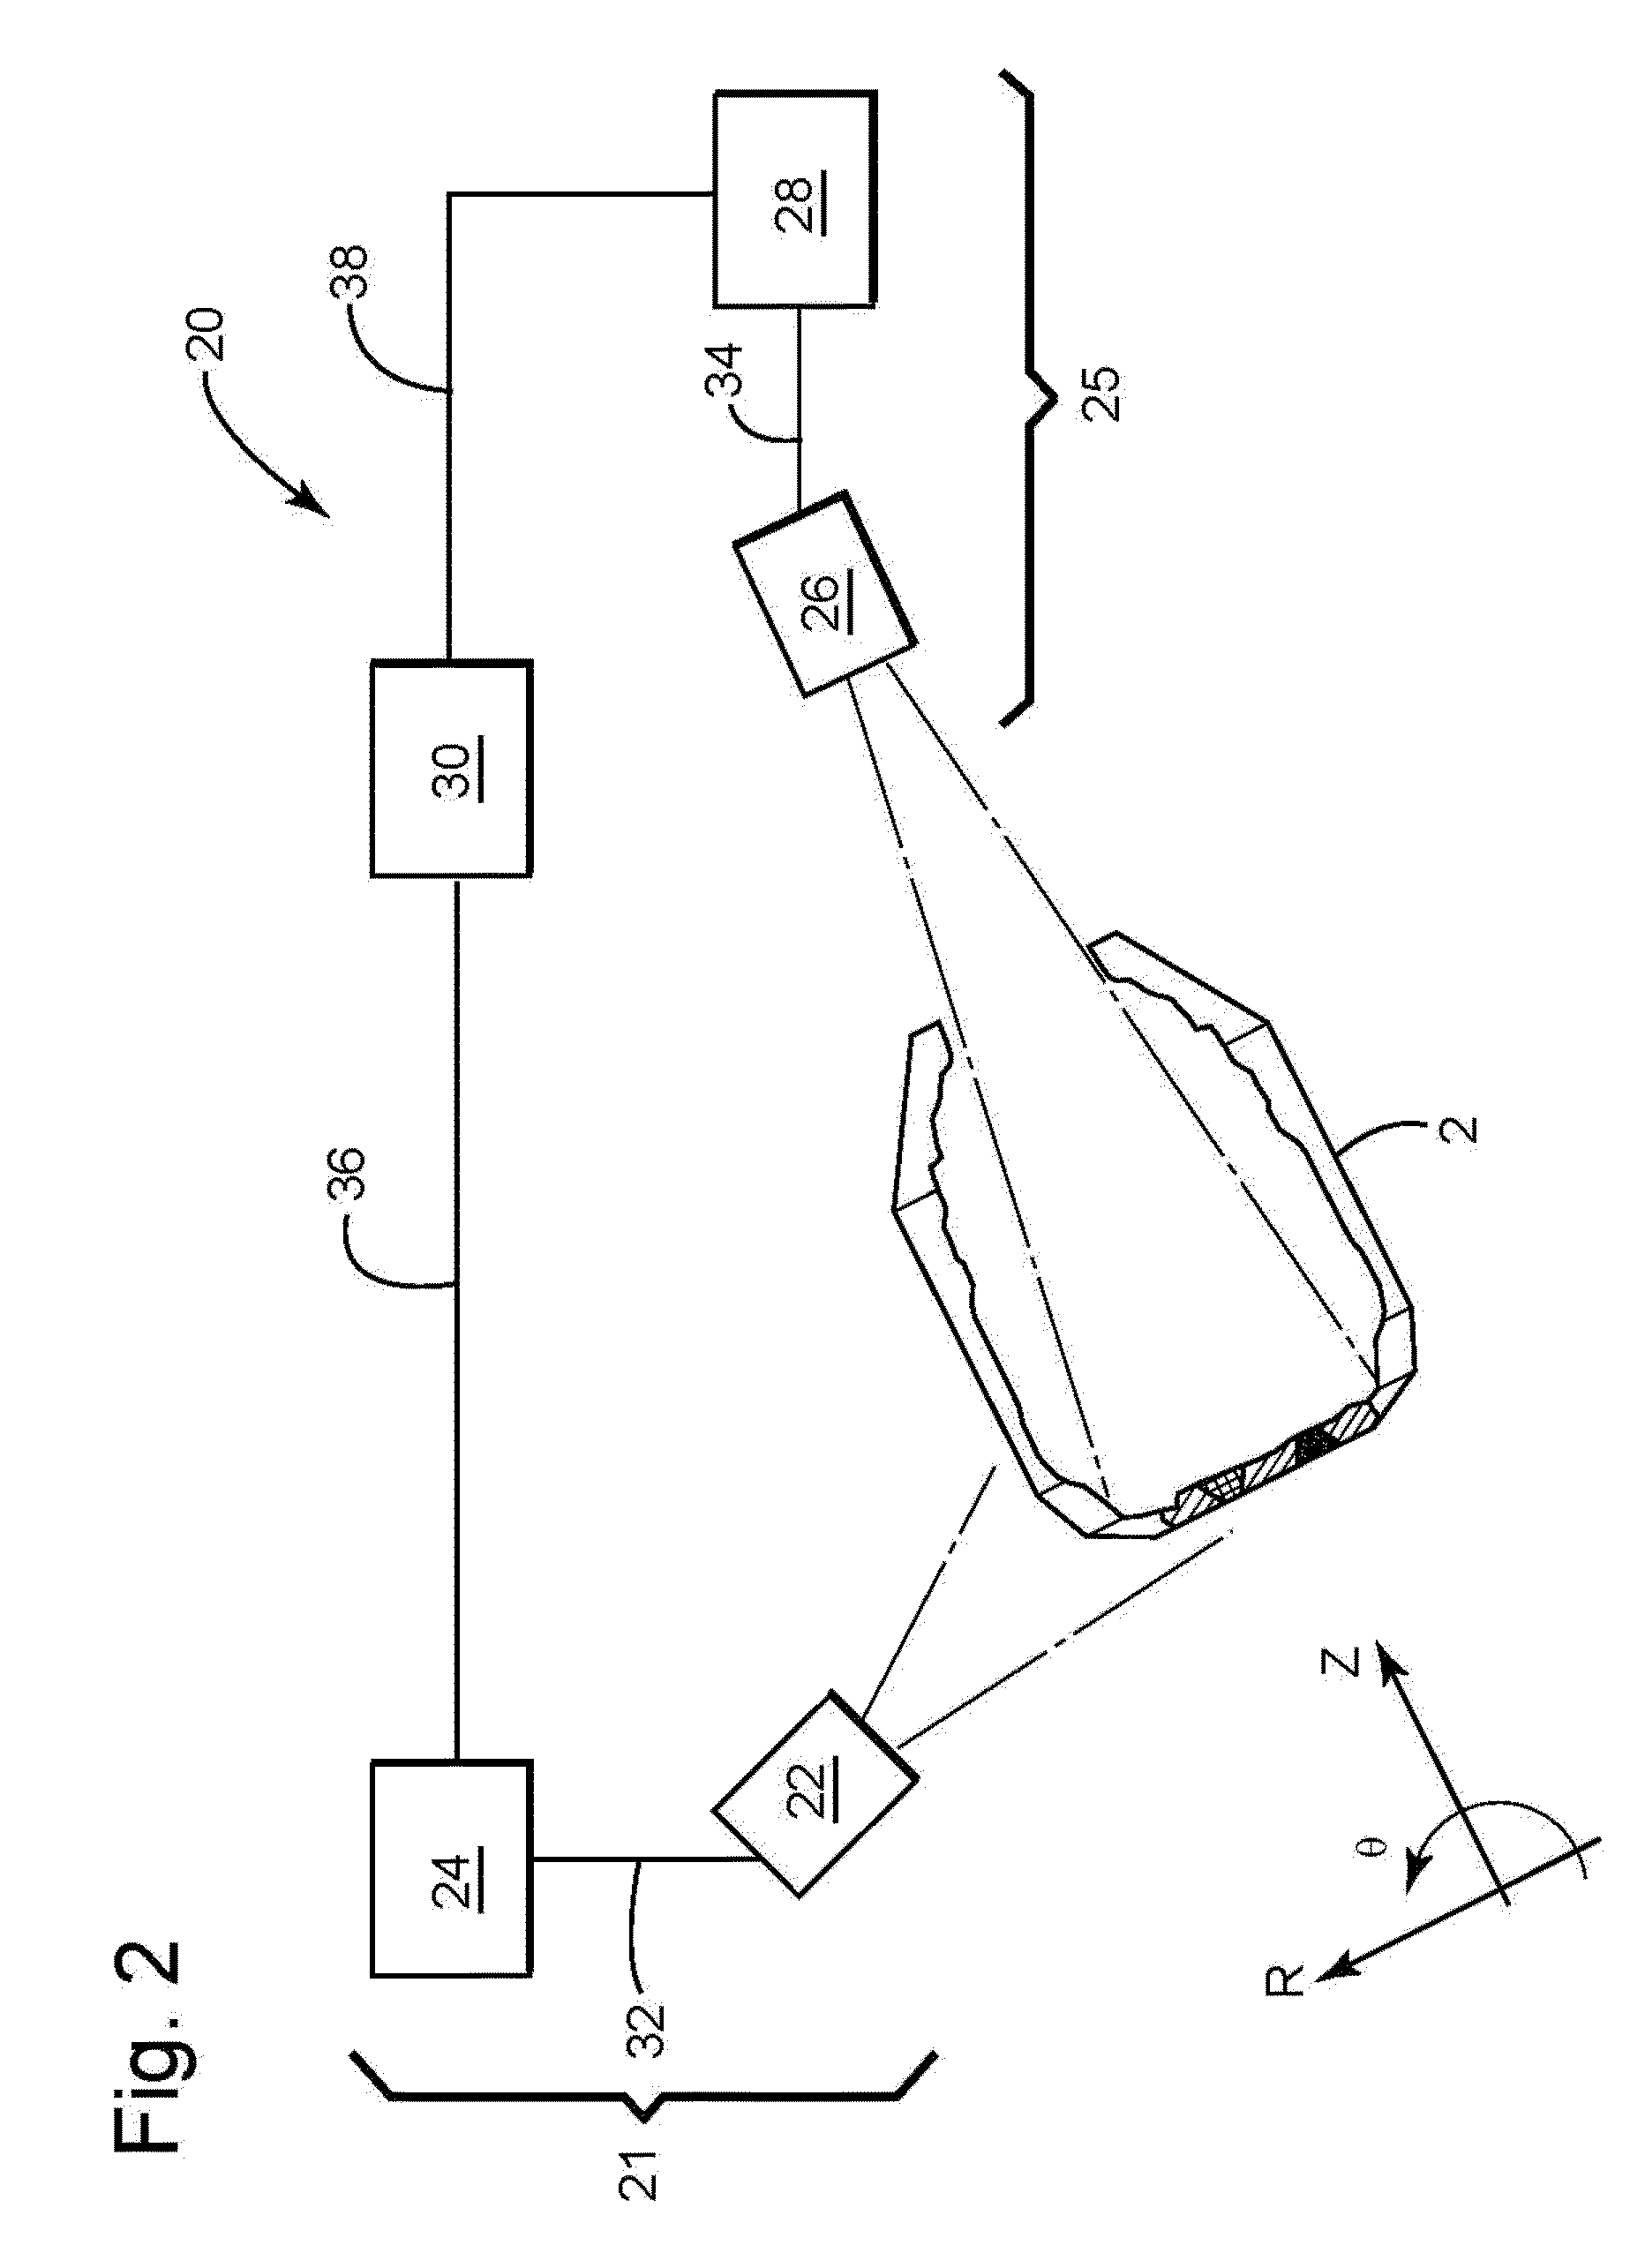 Apparatus, process, and system for monitoring the integrity of containers